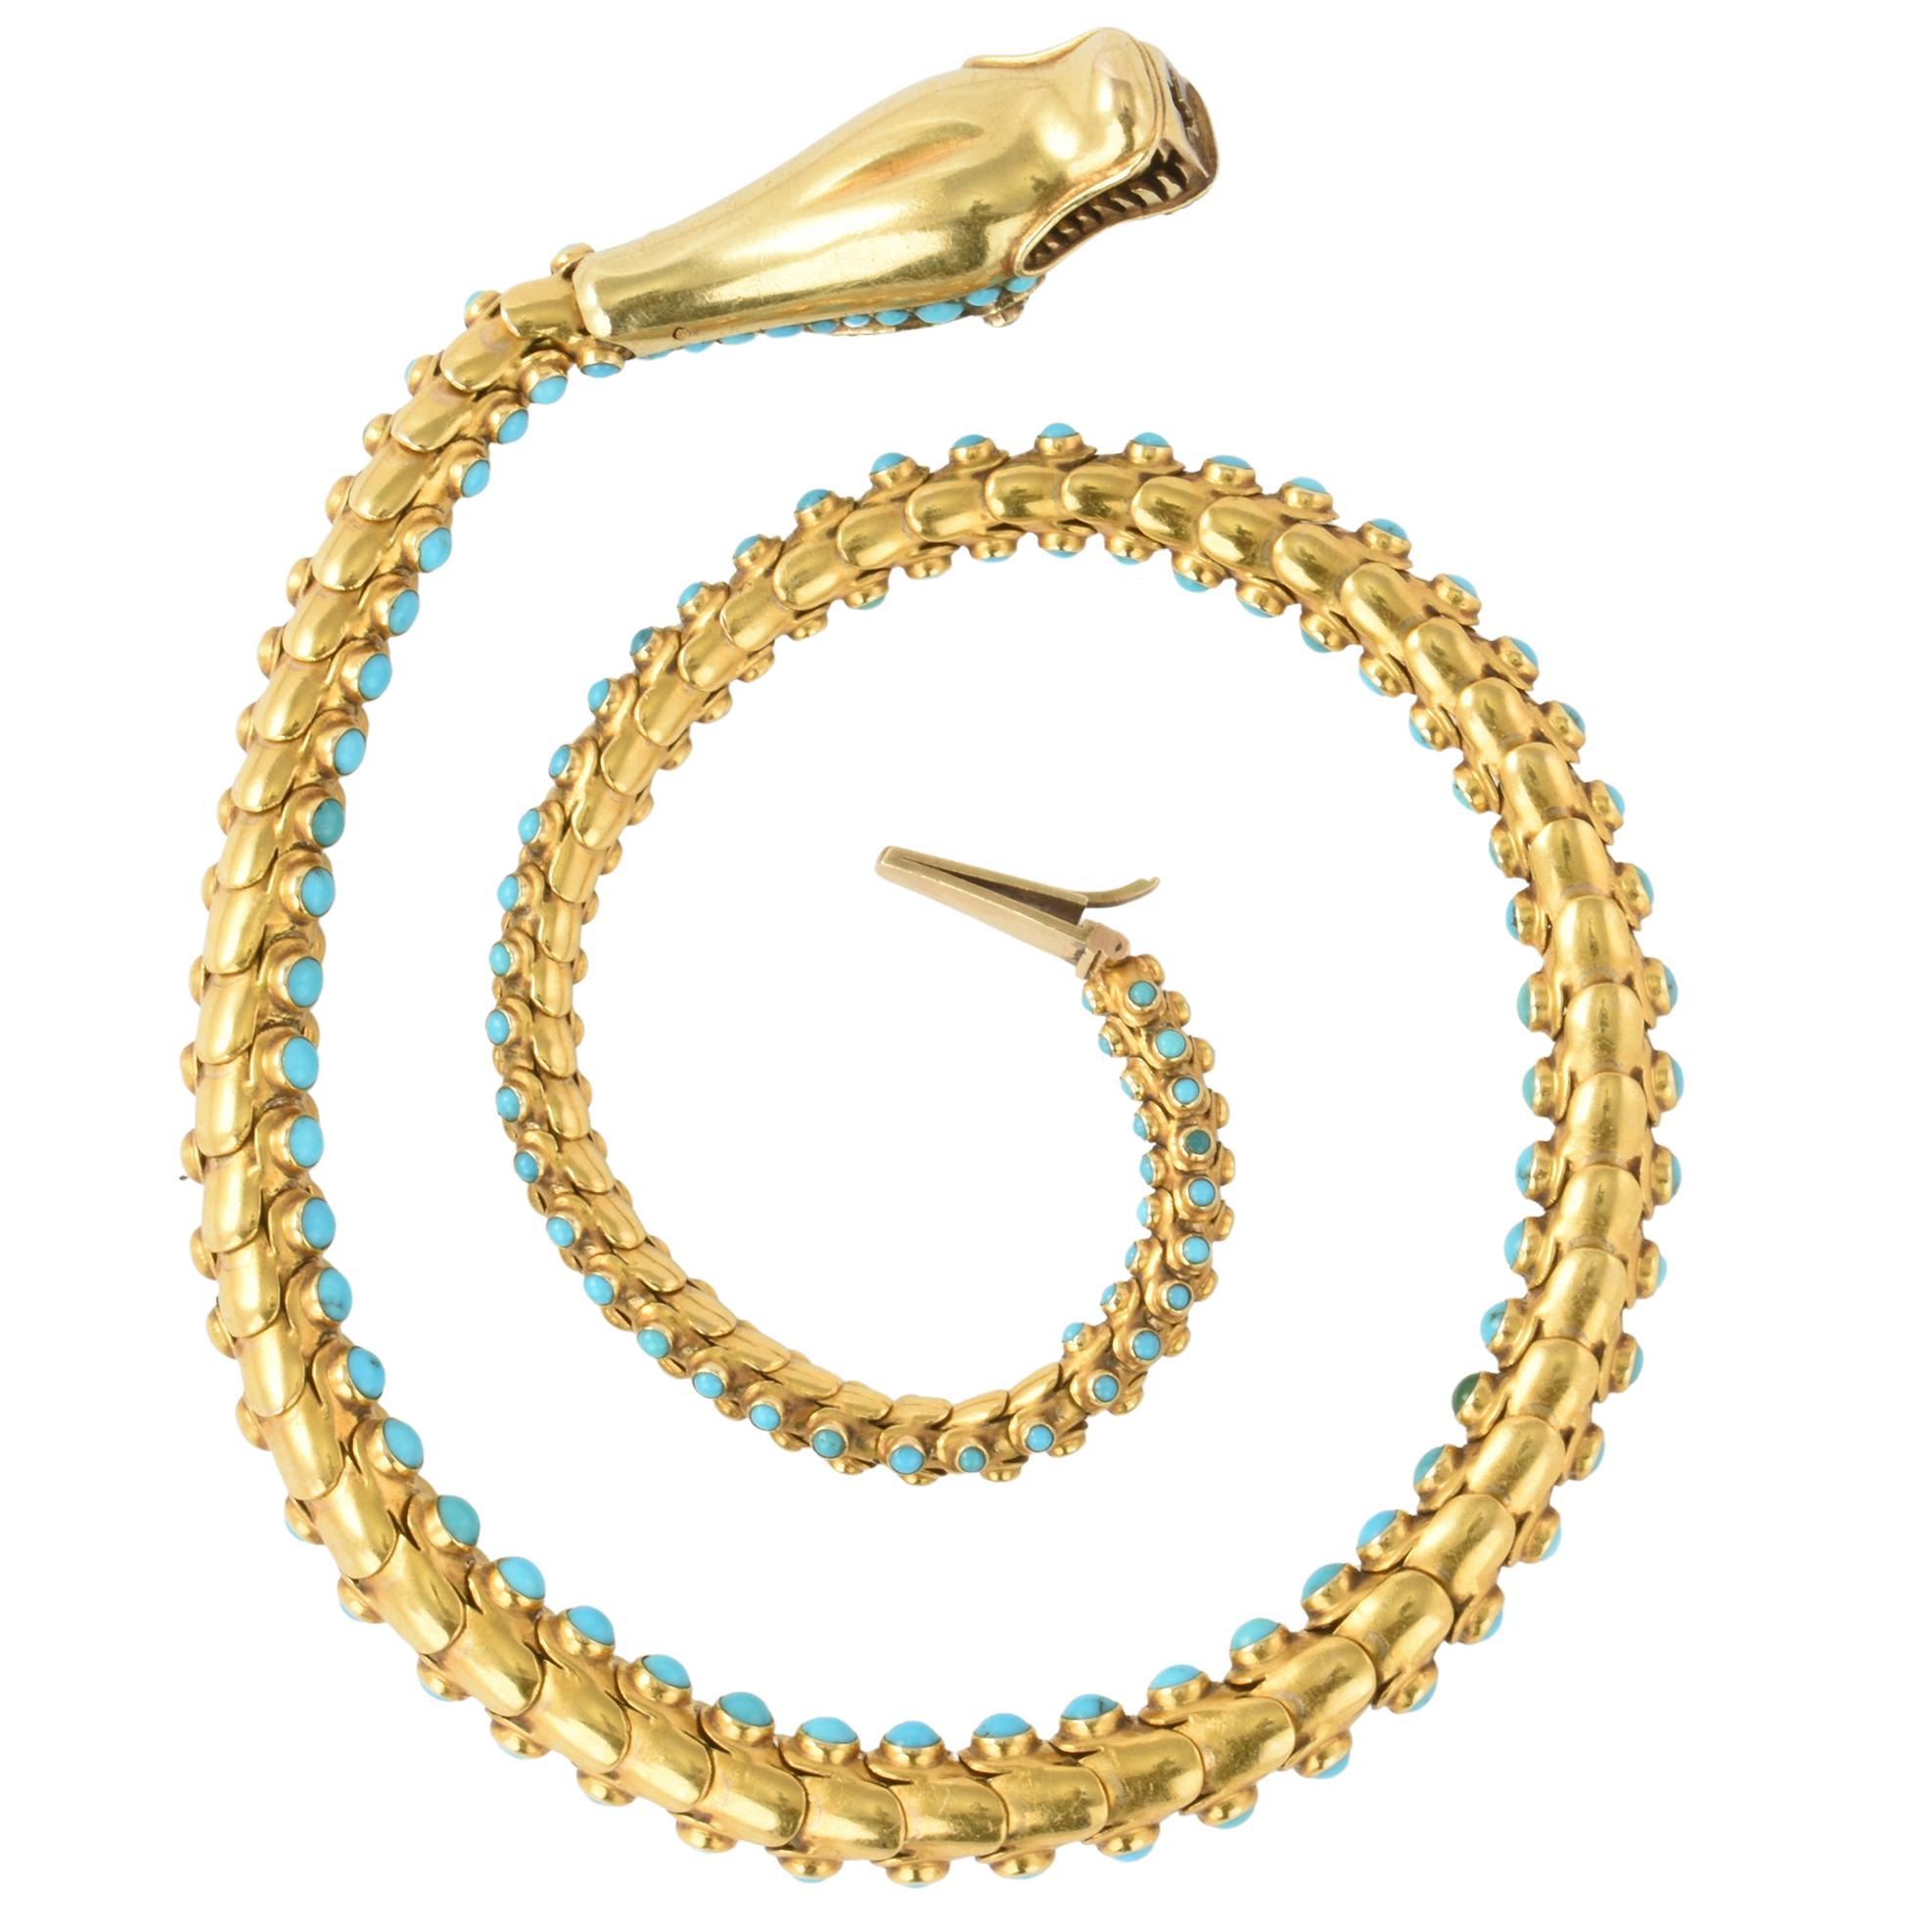 Women's Victorian 15k Gold & Turquoise Snake Necklace, circa 1860 For Sale